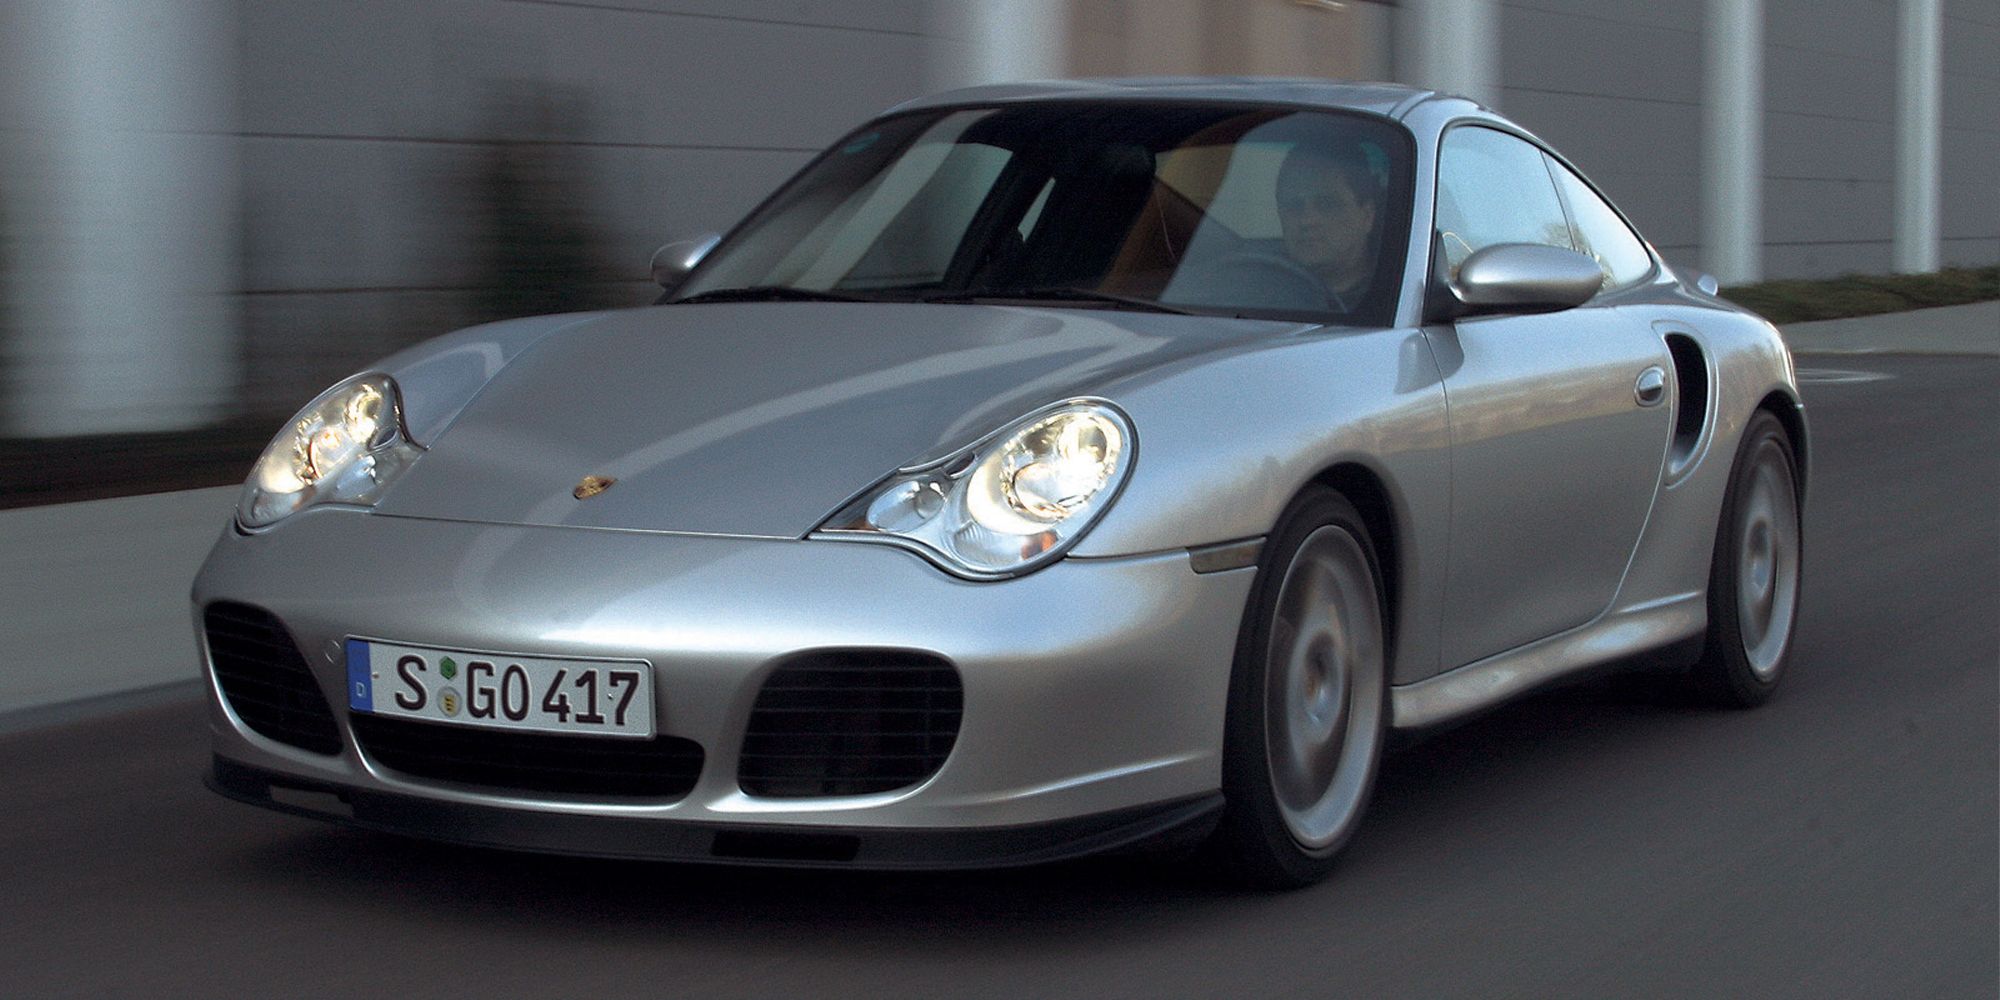 The front of the 996 Turbo S